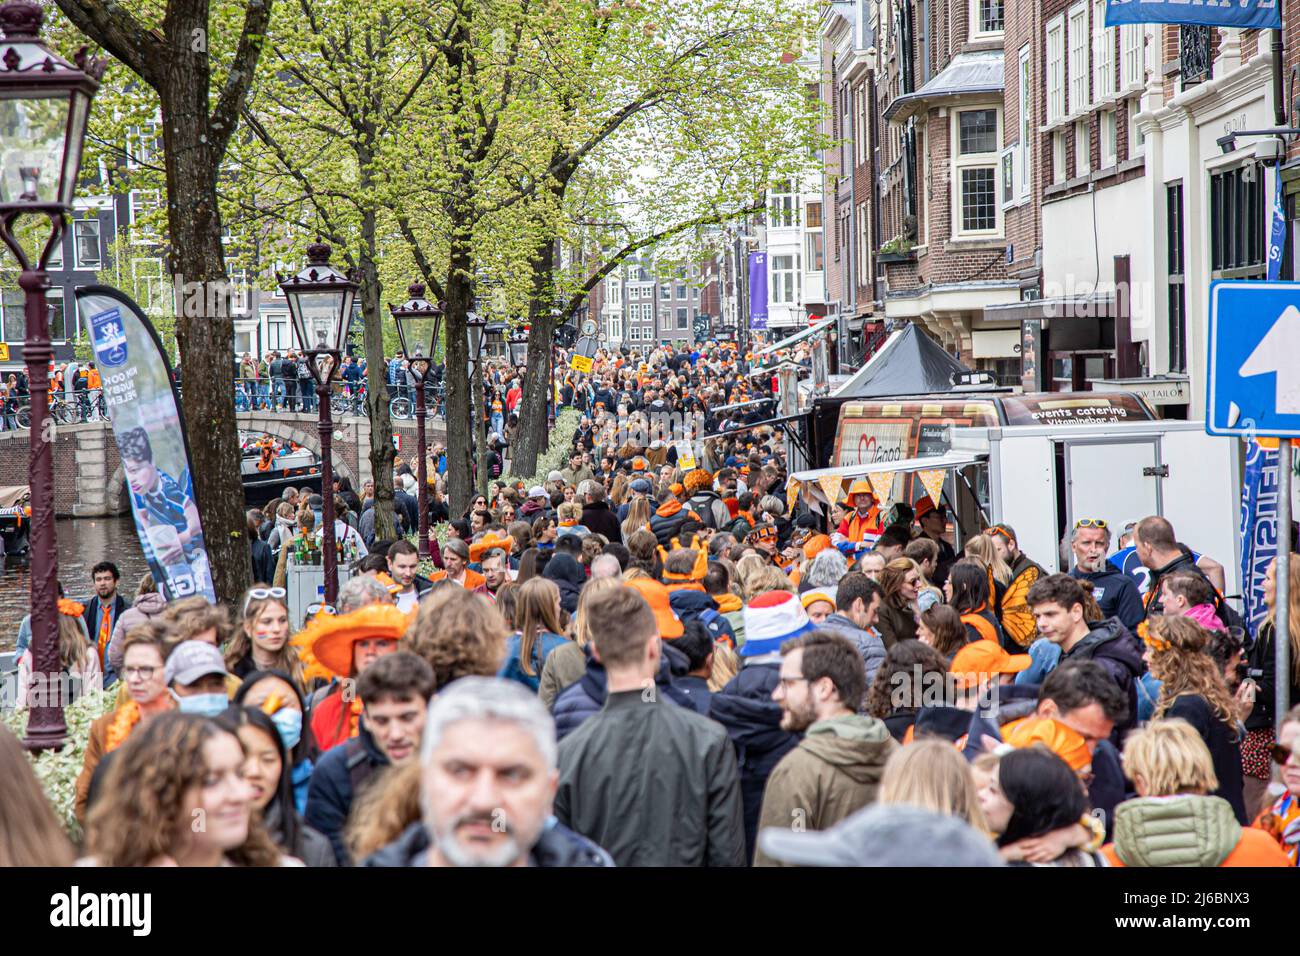 Crowds of people seen on the Streets of Amsterdam during the King's Day celebration. King's Day known as Koningsdag is an orange filled celebration for the king's birthday, a national holiday full of events across the country. Thousands of local revellers and tourists visited Amsterdam to celebrate and party around the canals while wearing orange clothes and the boats doing a parade in the water canals. (Photo by Nik Oiko / SOPA Images/Sipa USA) Stock Photo